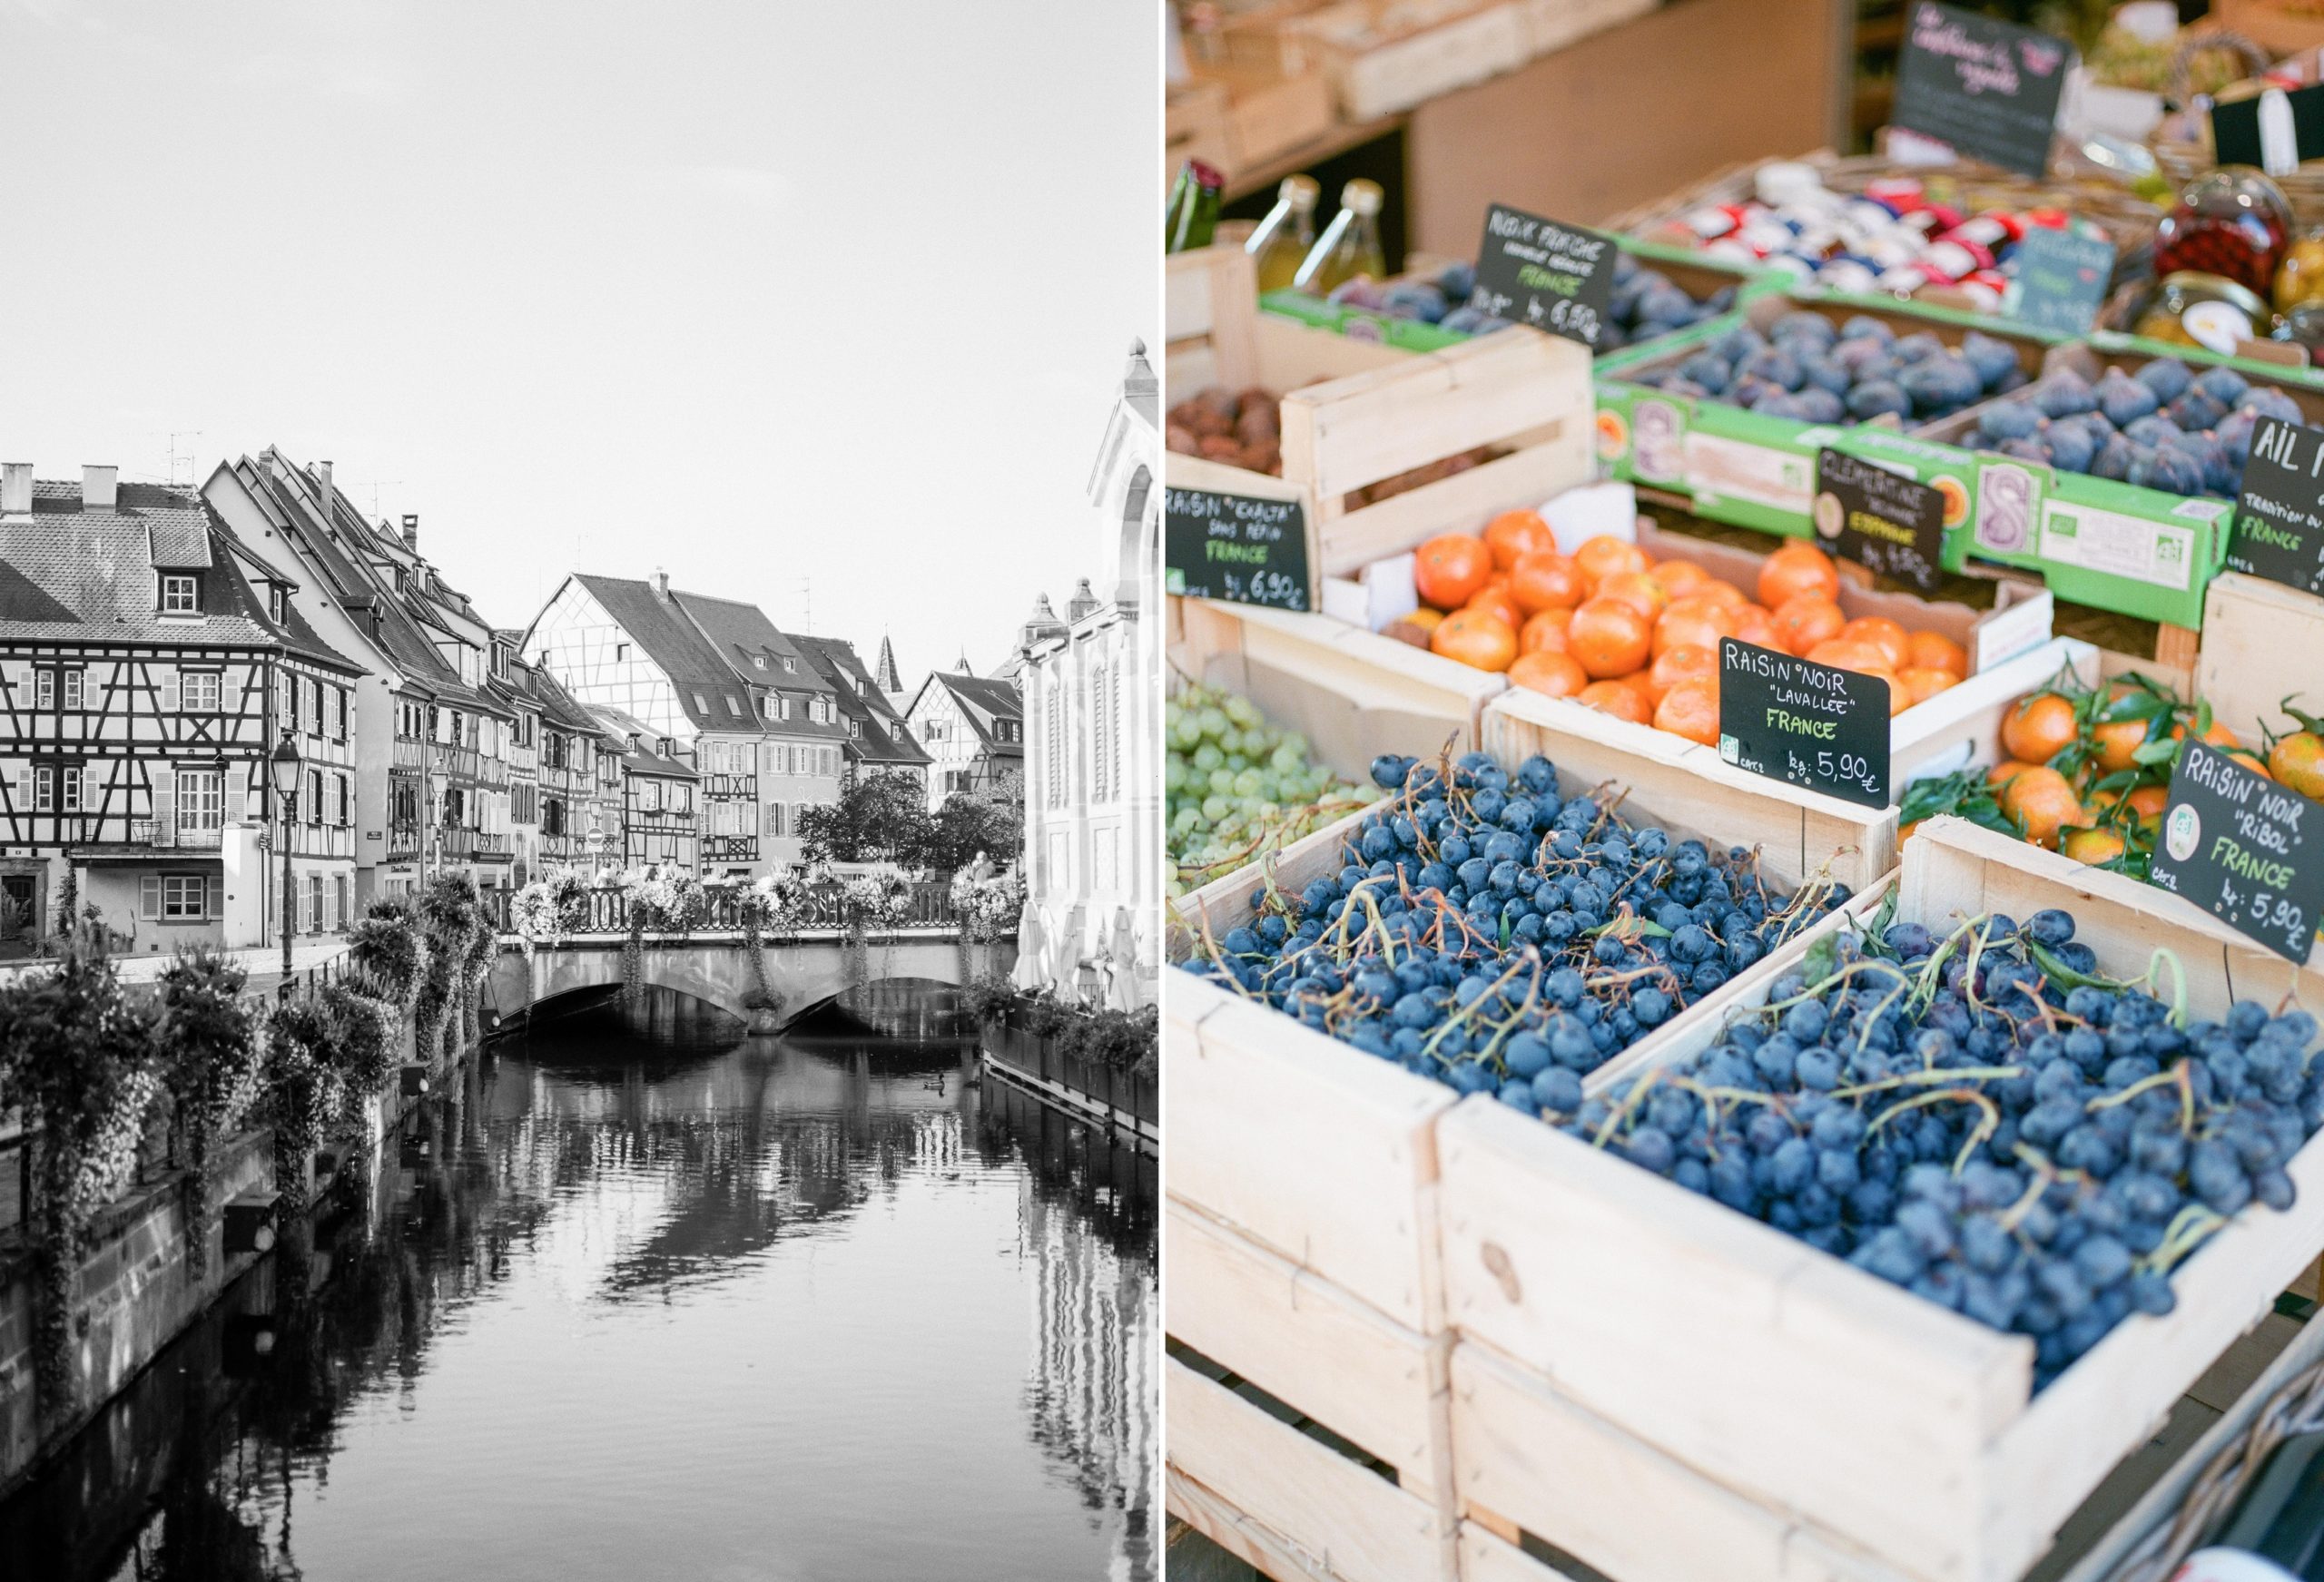 Washington, DC wedding photographer, Alicia Lacey, shares photos of her travels to Alsace, France and Zermatt, Switzerland. 